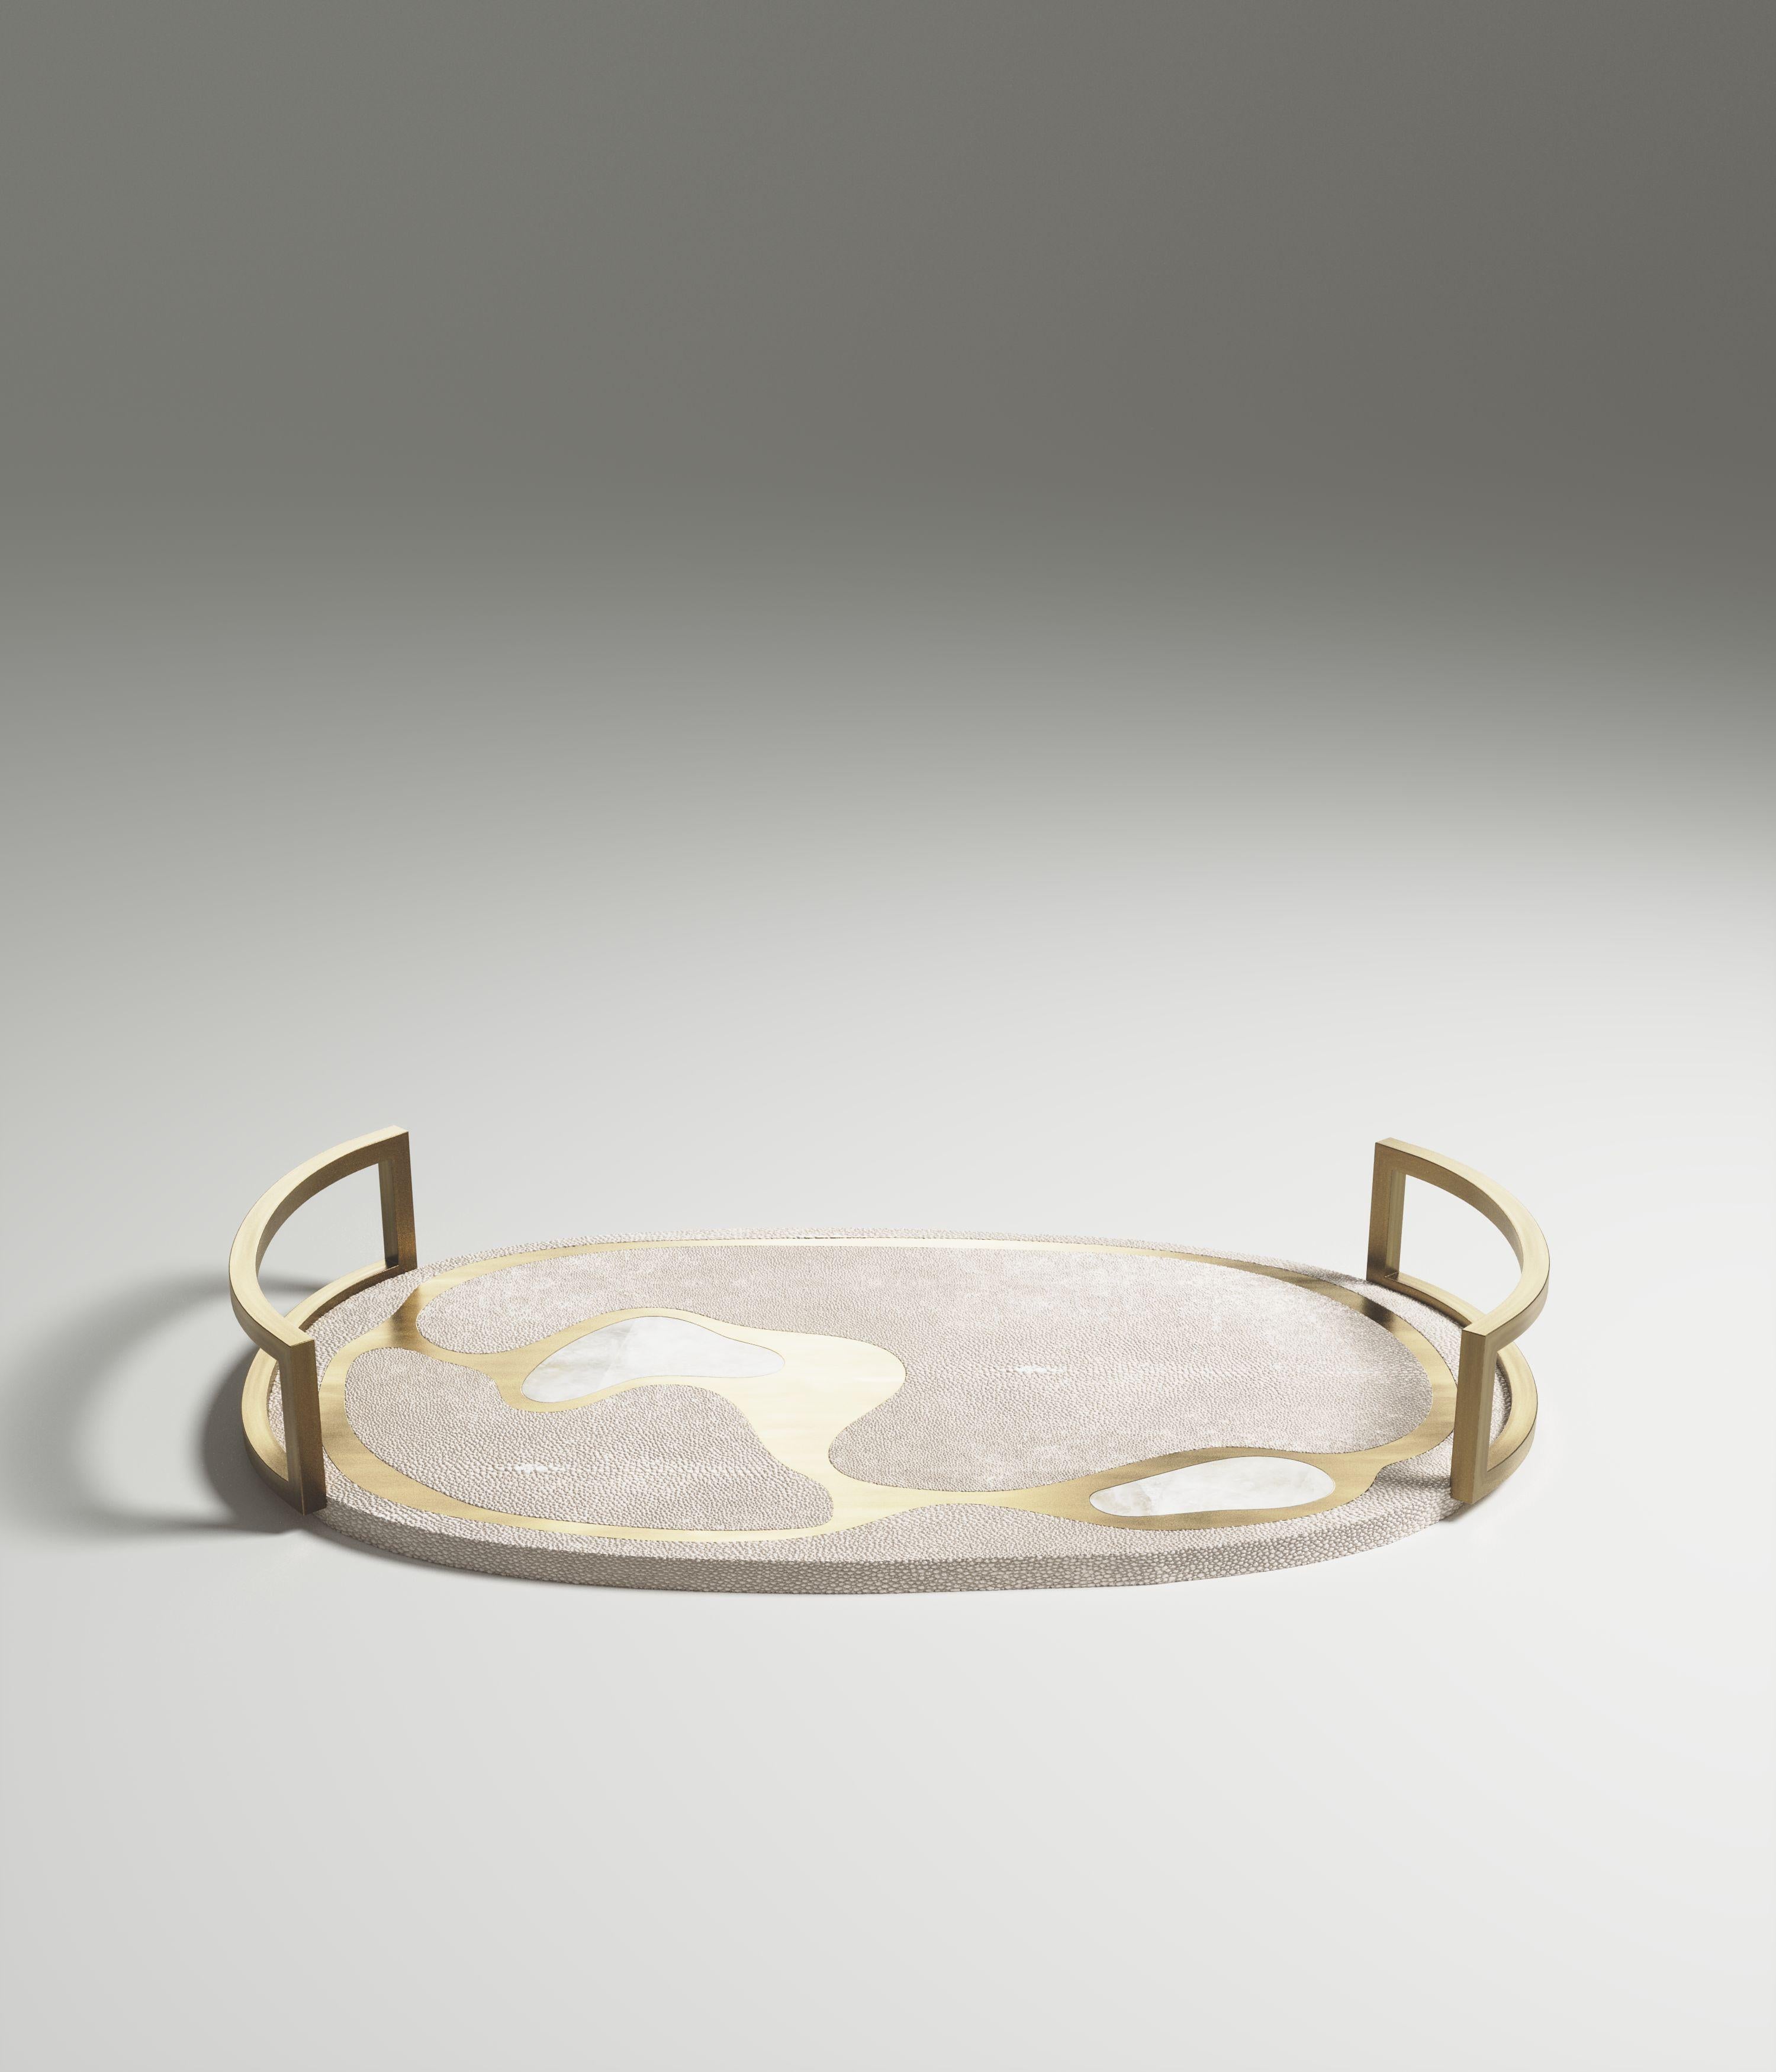 The Mask Oval Tray by Kifu Paris is a versatile and organic piece. The amorphous top and base are inlaid in a mixture of cream shagreen, white quartz and bronze-patina brass. This piece is designed by Kifu Augousti the daughter of Ria and Yiouri